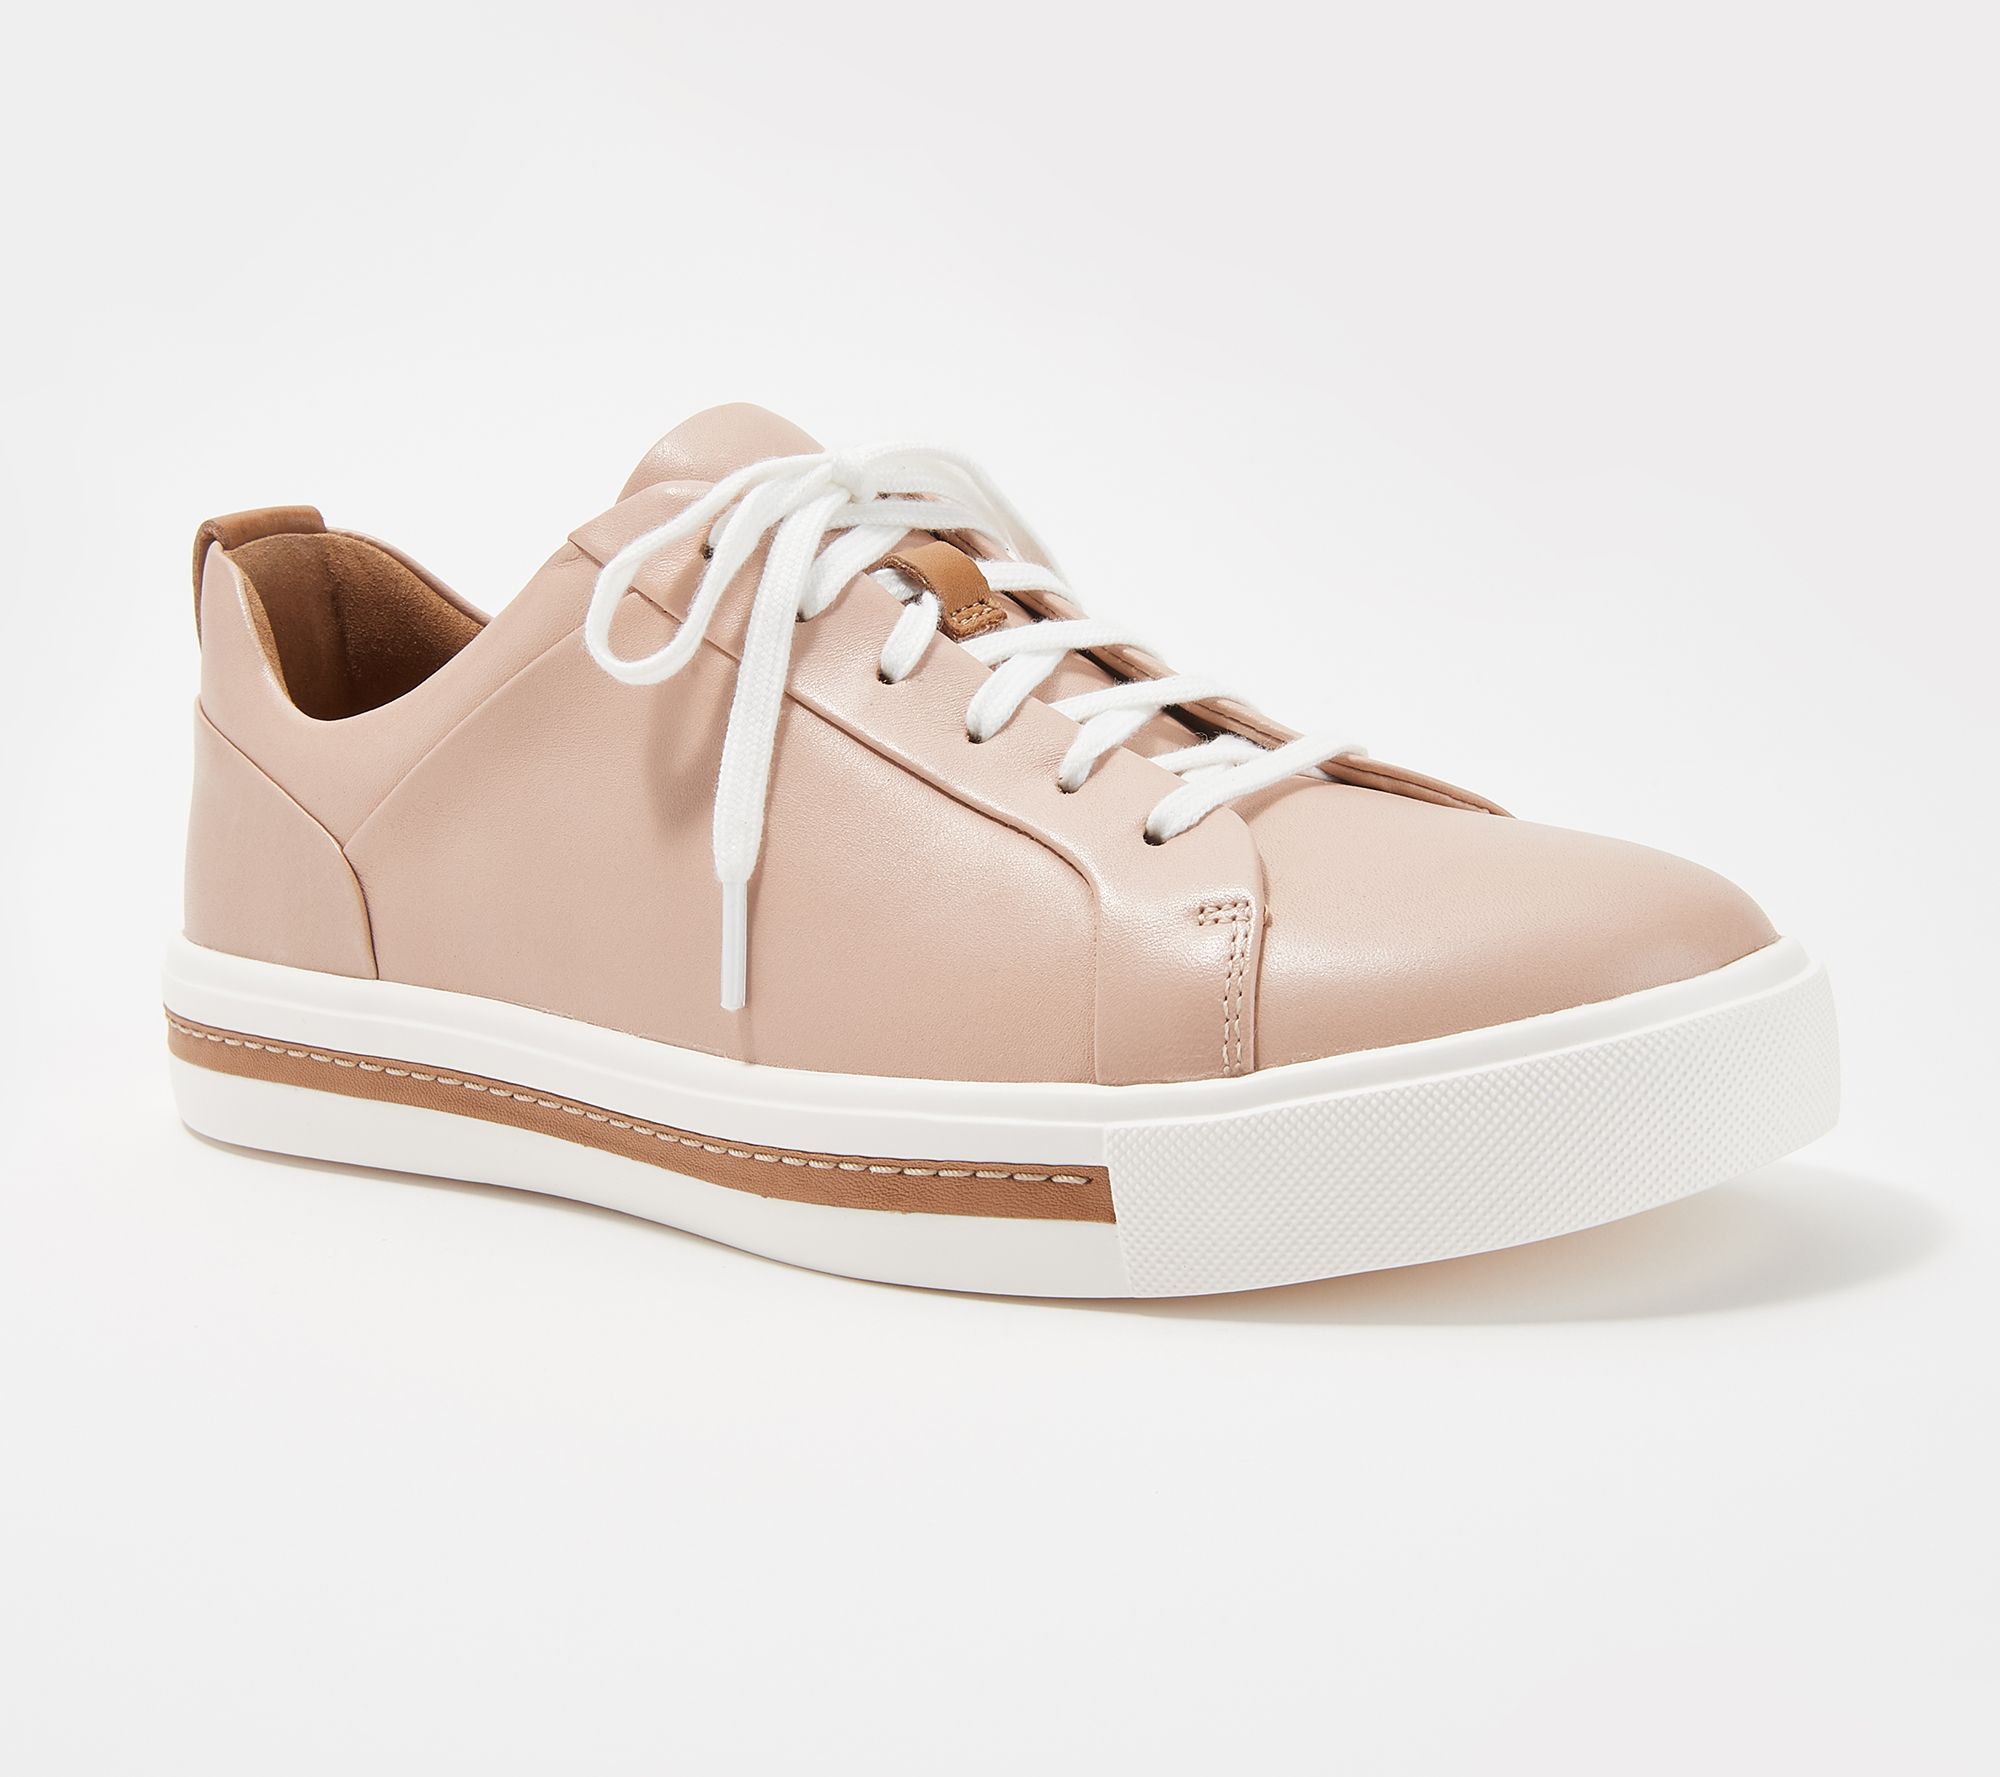 clark leather sneakers